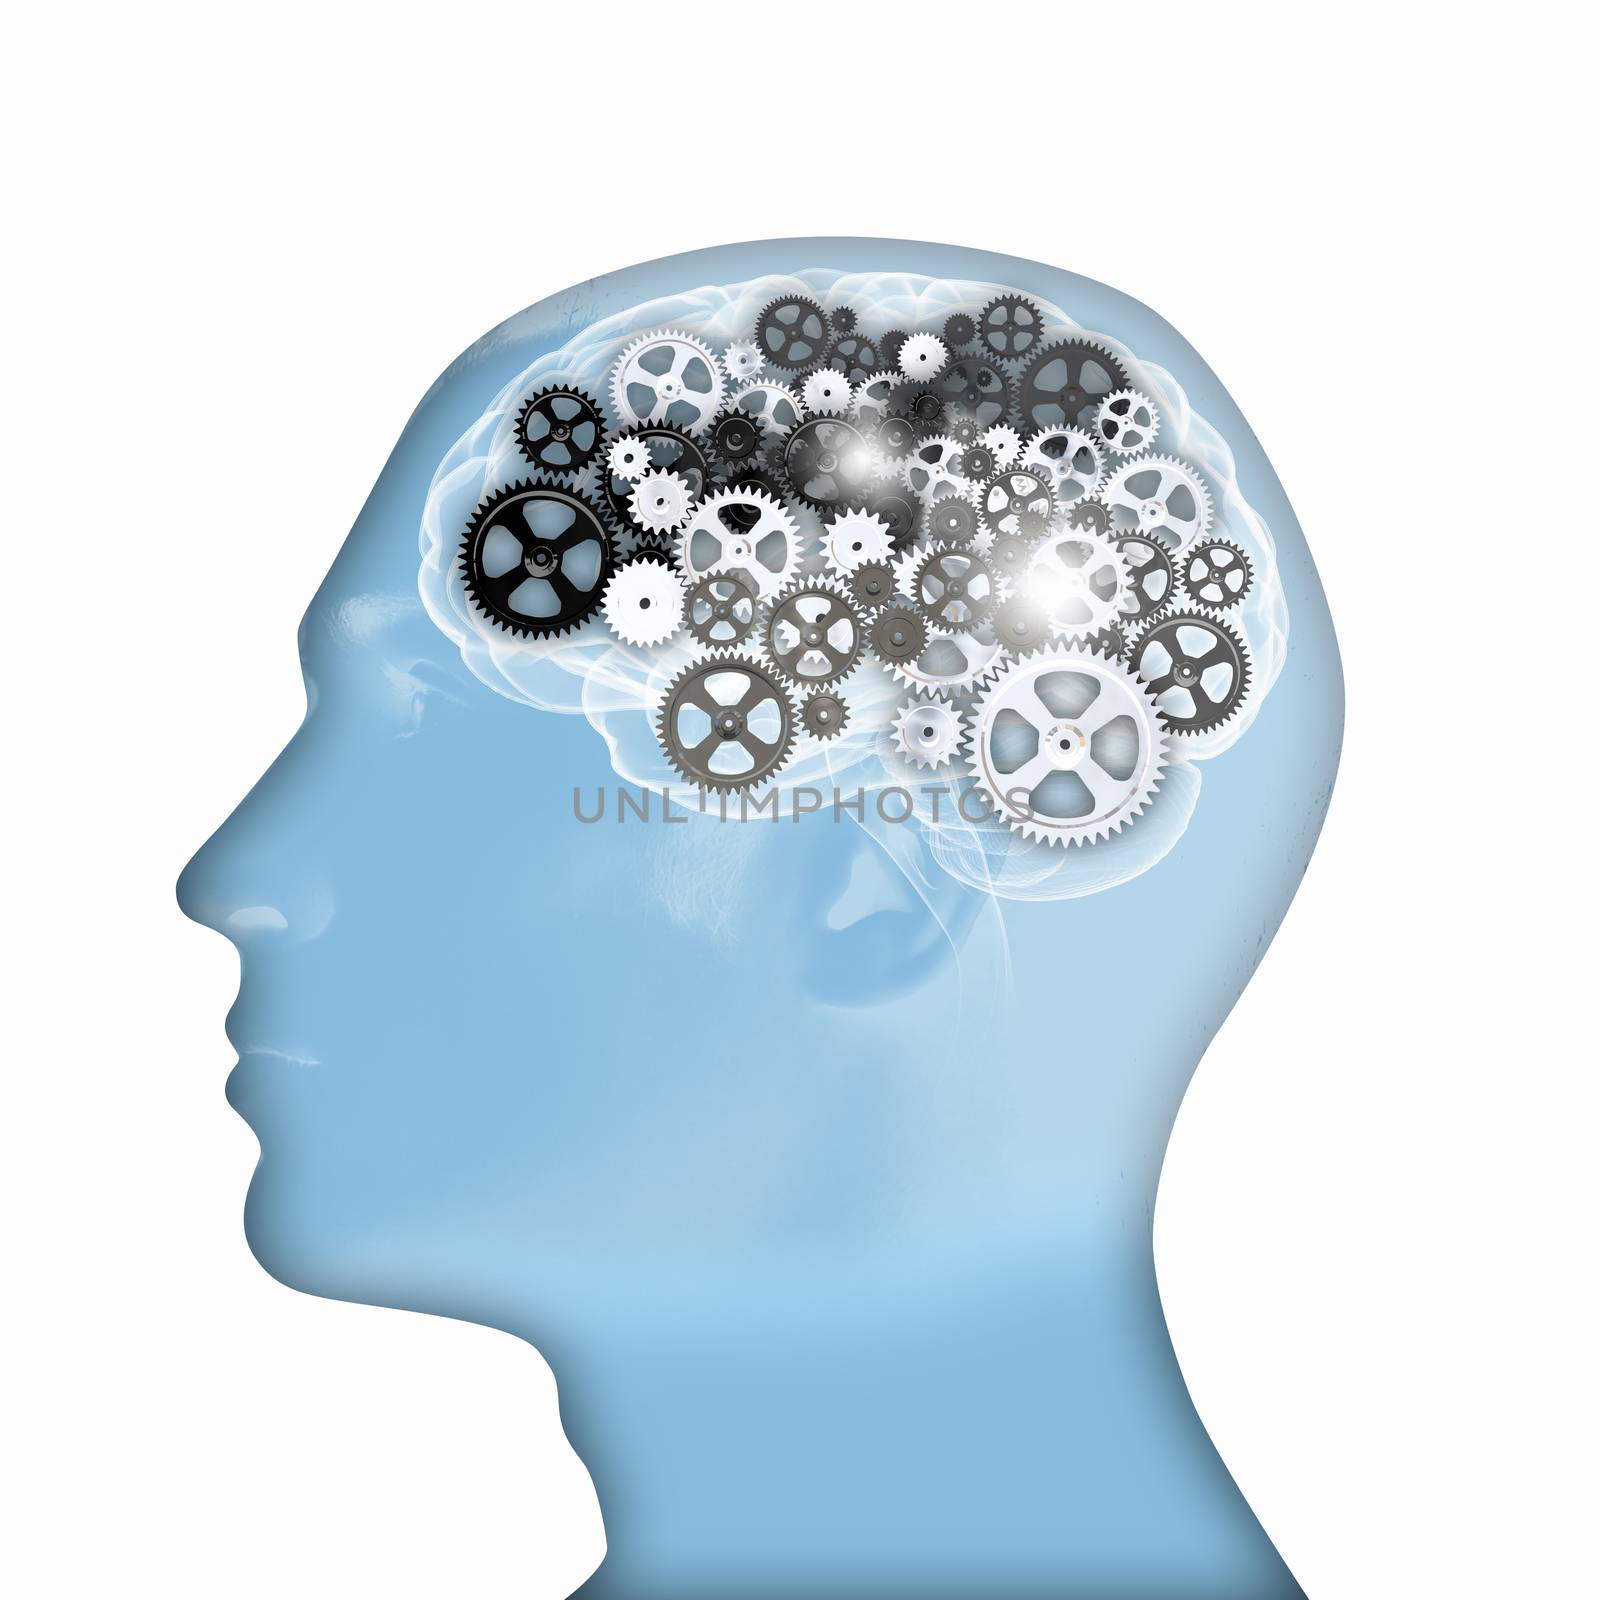 Human head silhouette with gears and cog wheel elements against white background